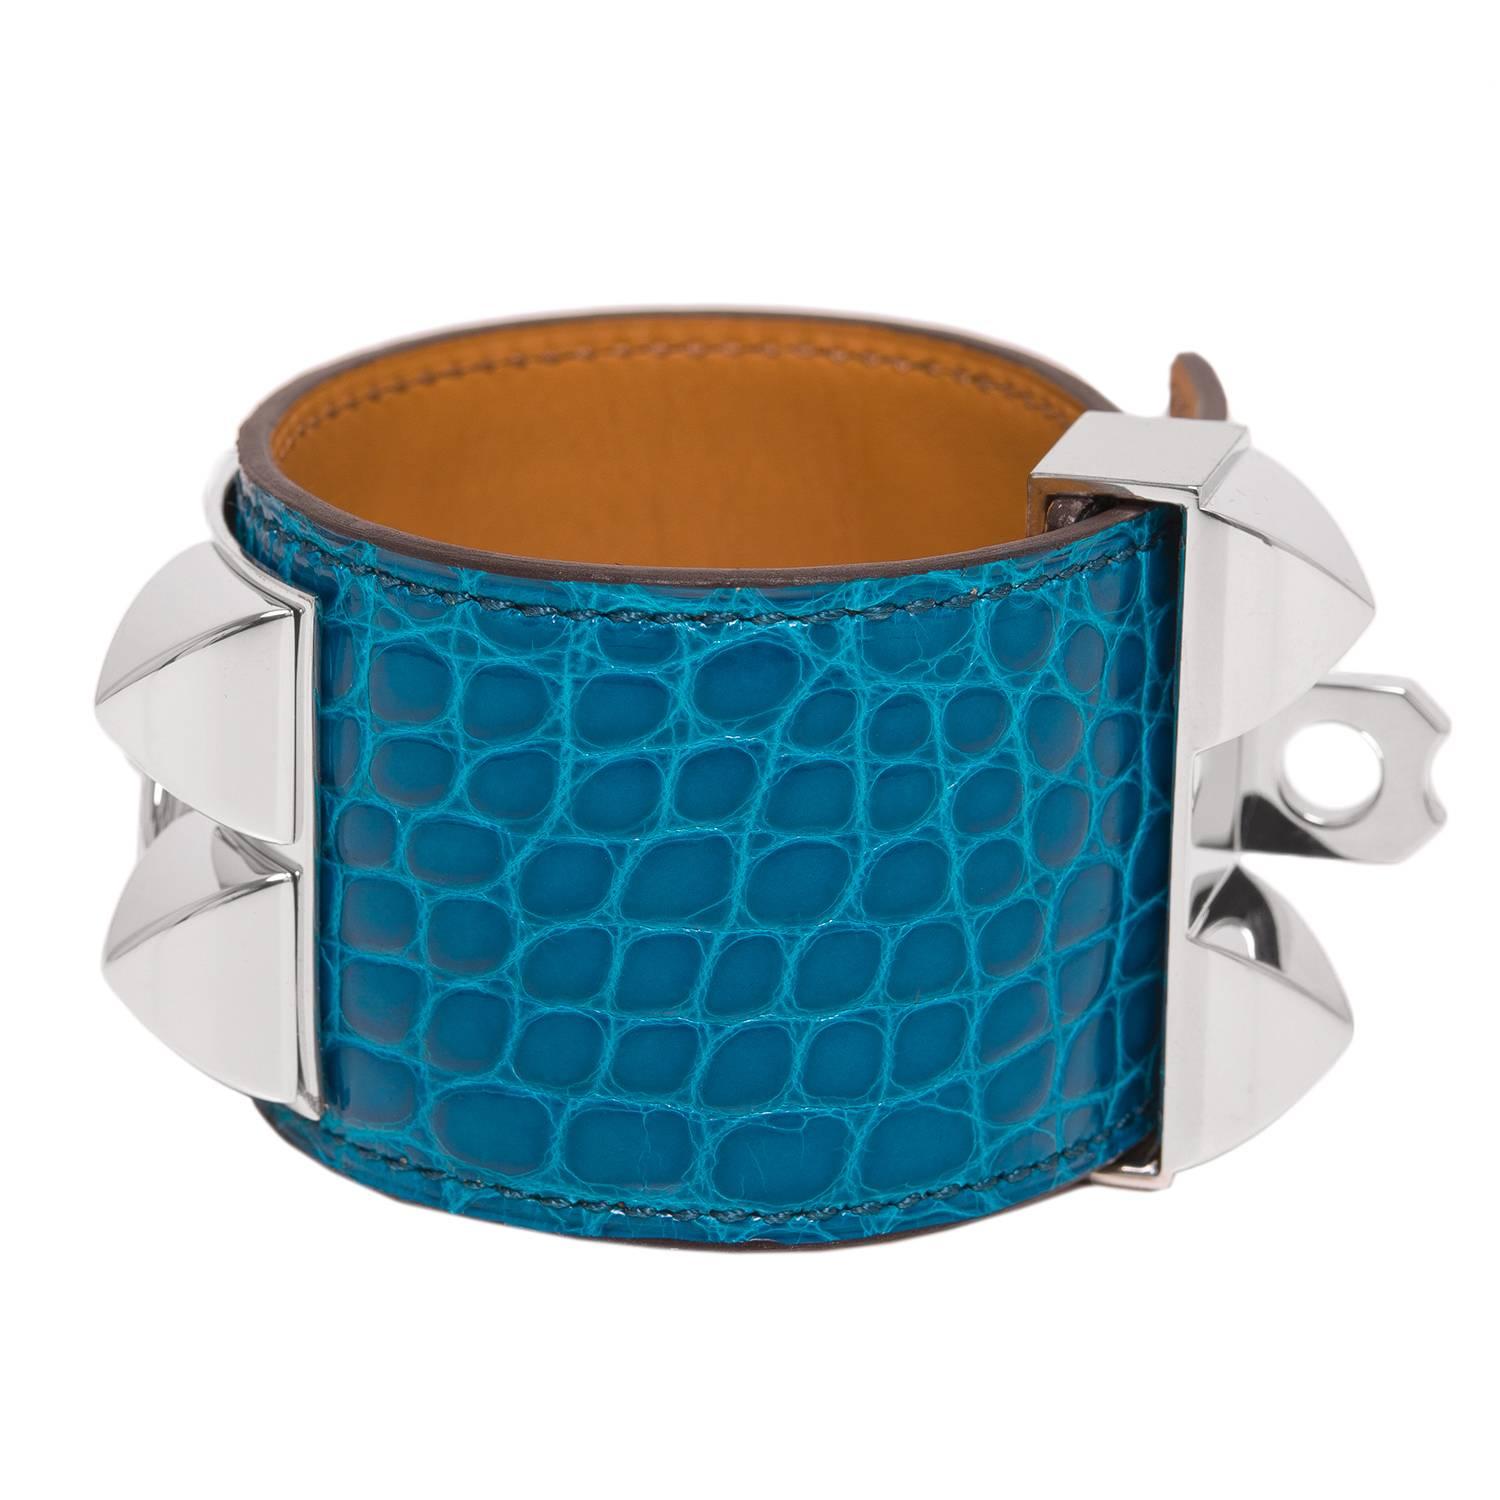 Hermes Collier de Chien (CDC) in Blue Izmir alligator with palladium plated hardware in size small.

This style features palladium pyramid studs, center ring and adjustable push lock closure.

Origin: France

Condition: Pristine, never